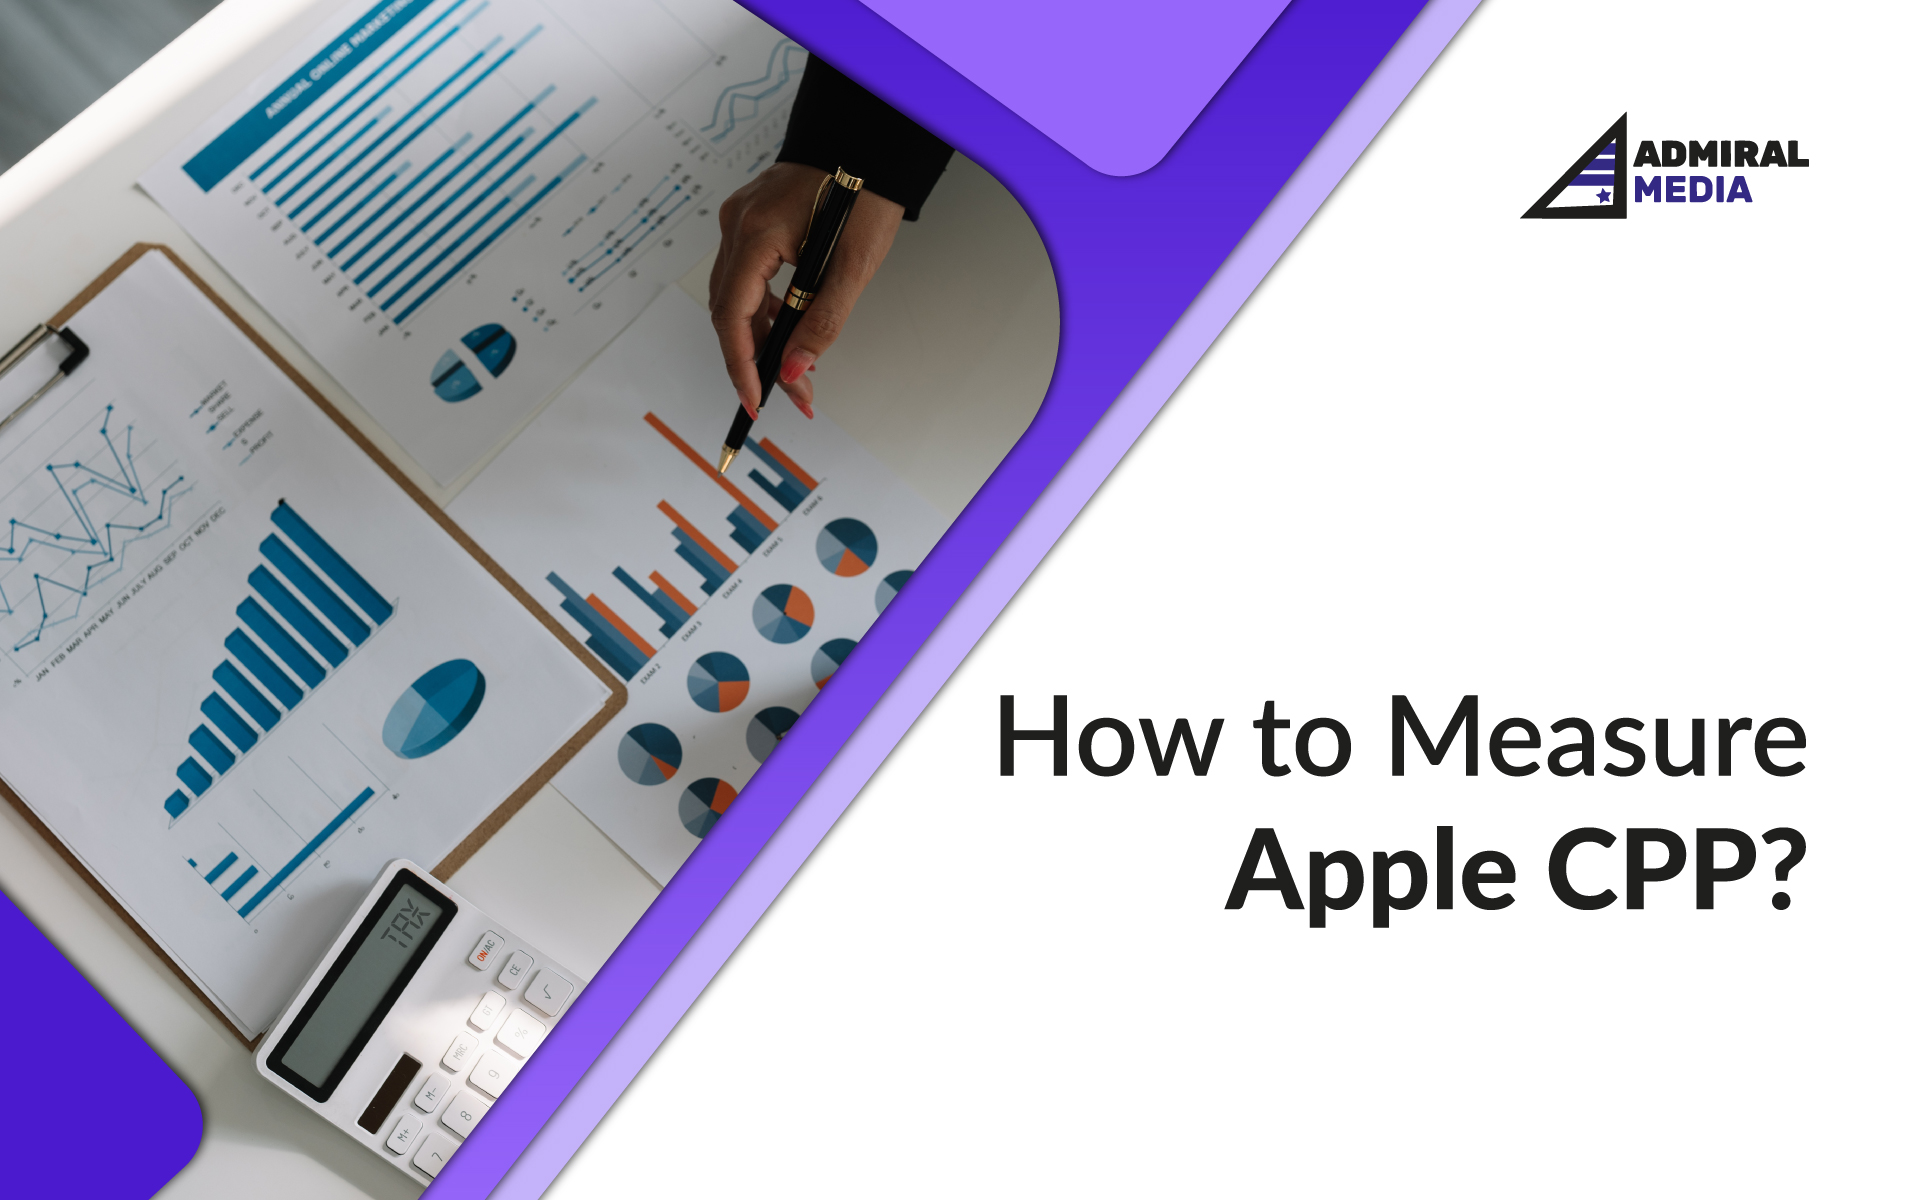 How to Measure Apple CPP?